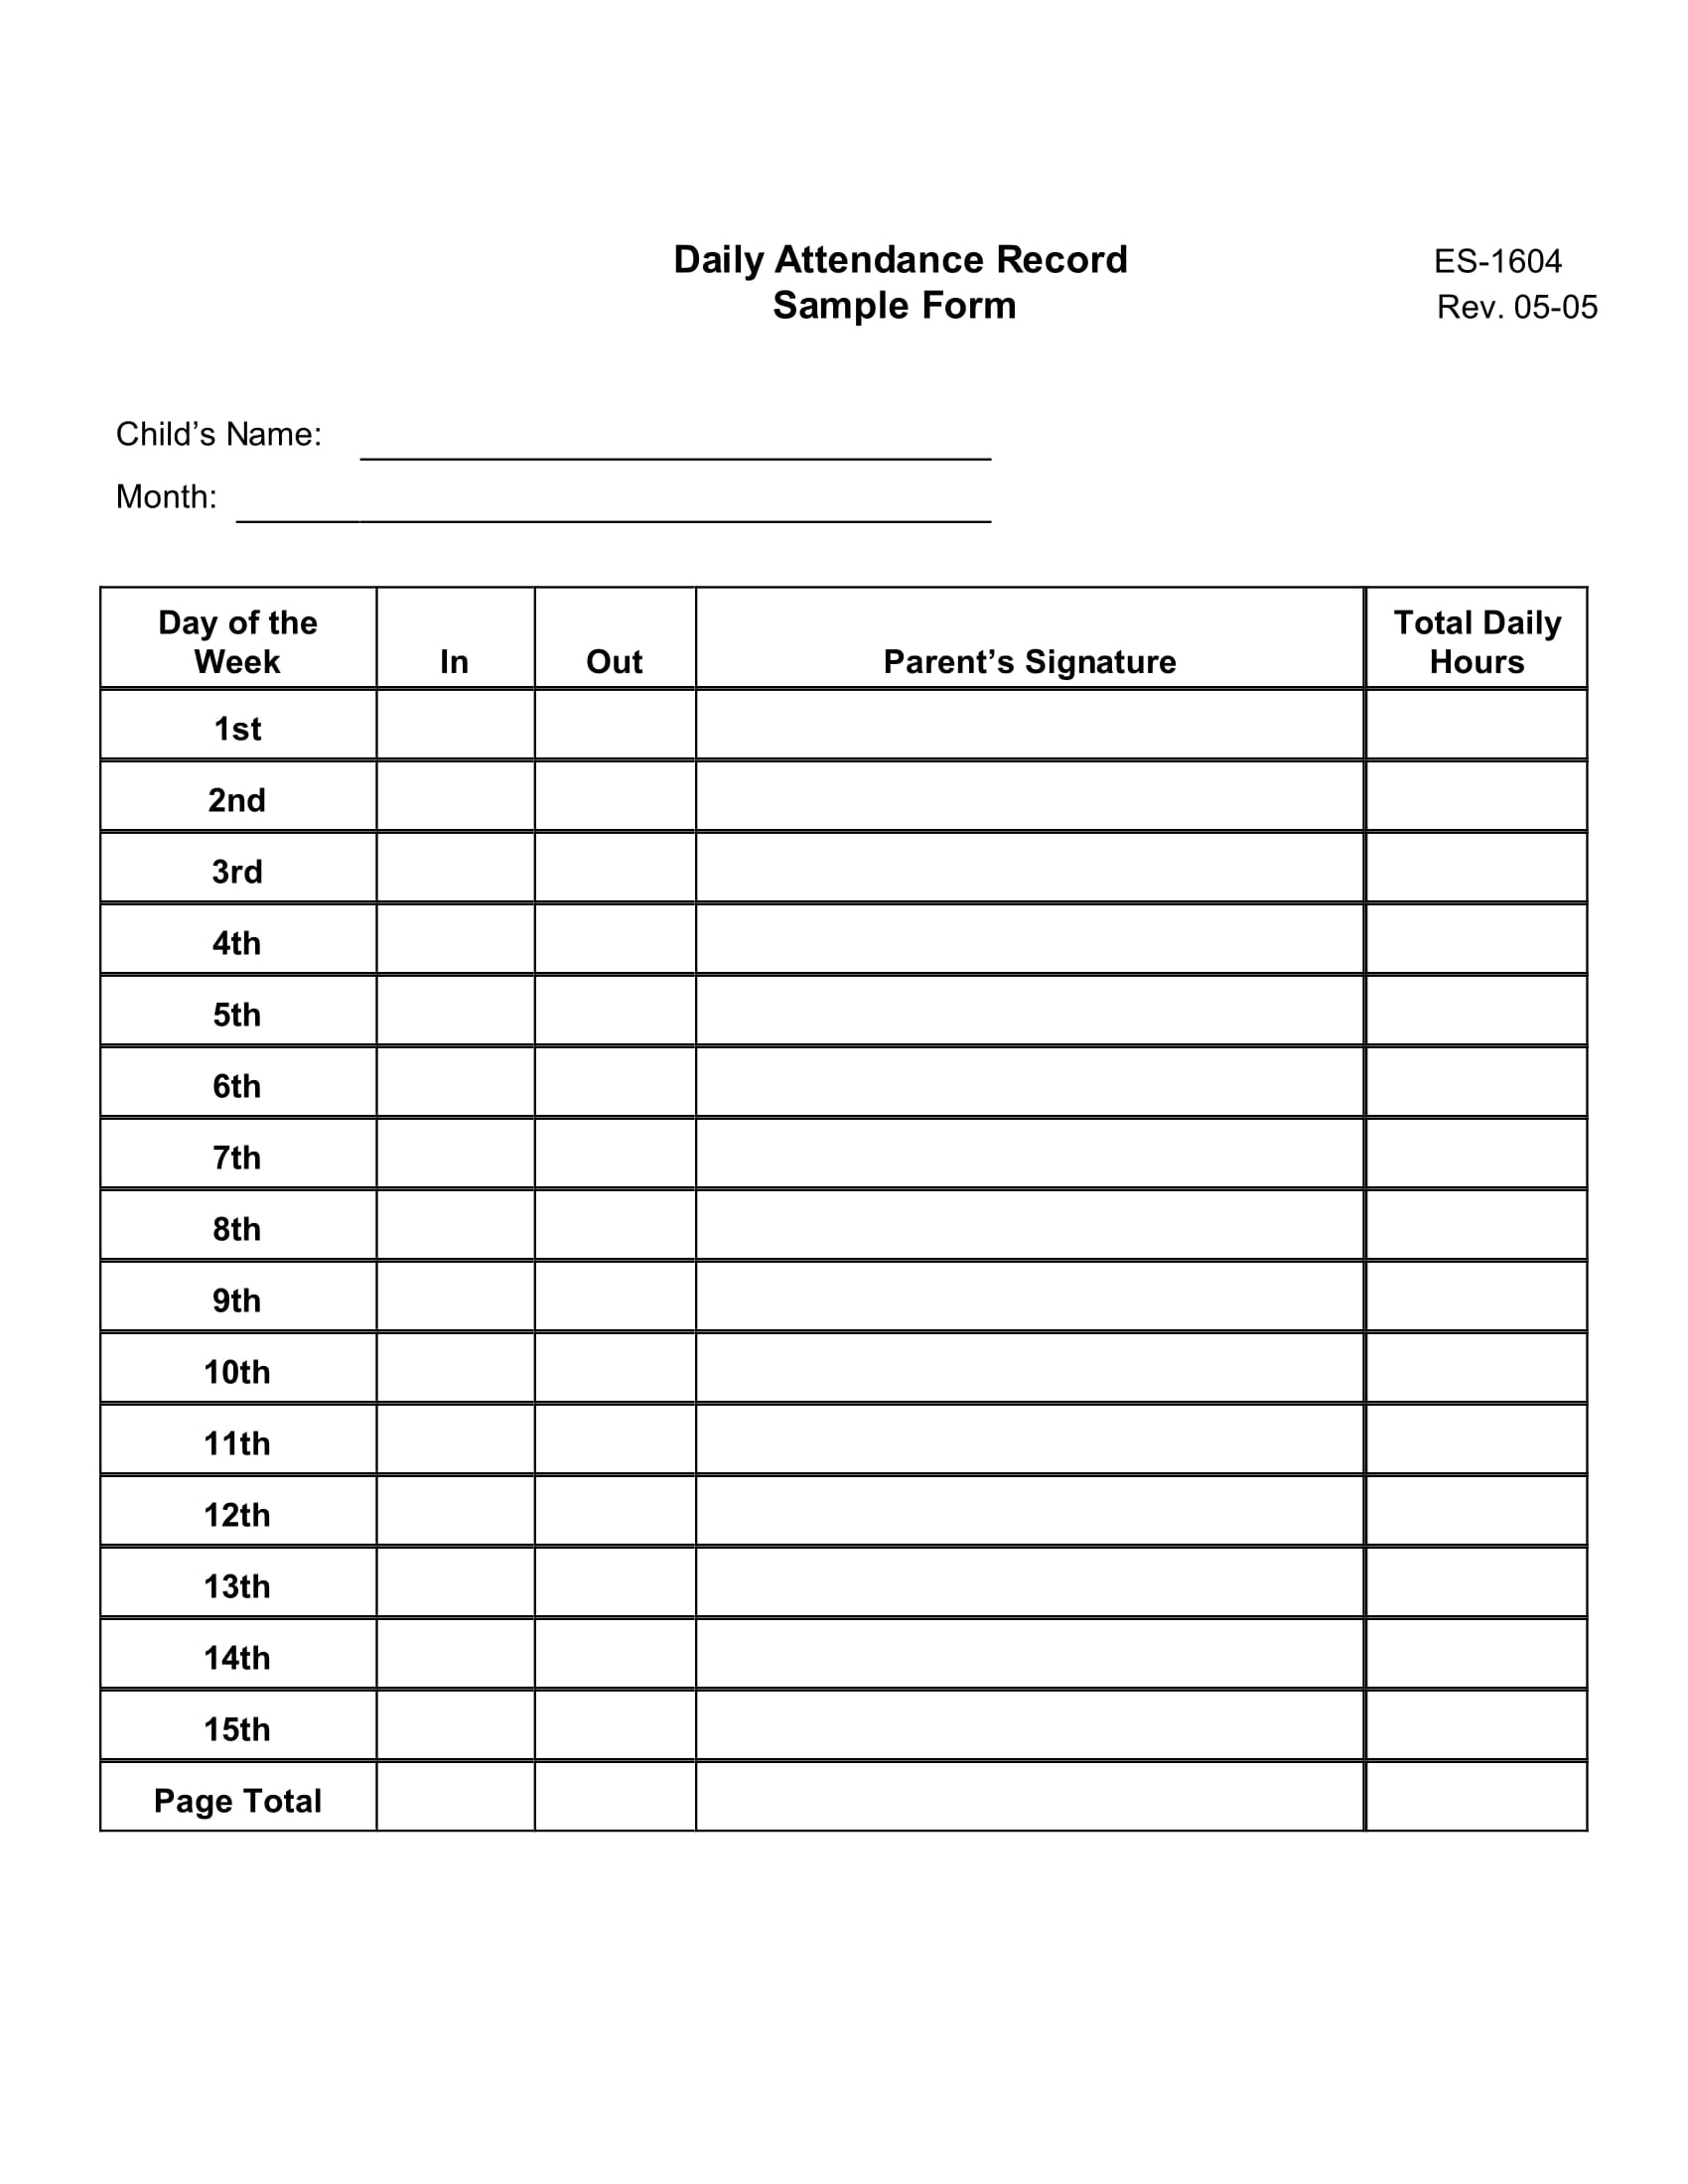 Printable Attendance Sheet Examples - 14+ PDF, Word | Examples